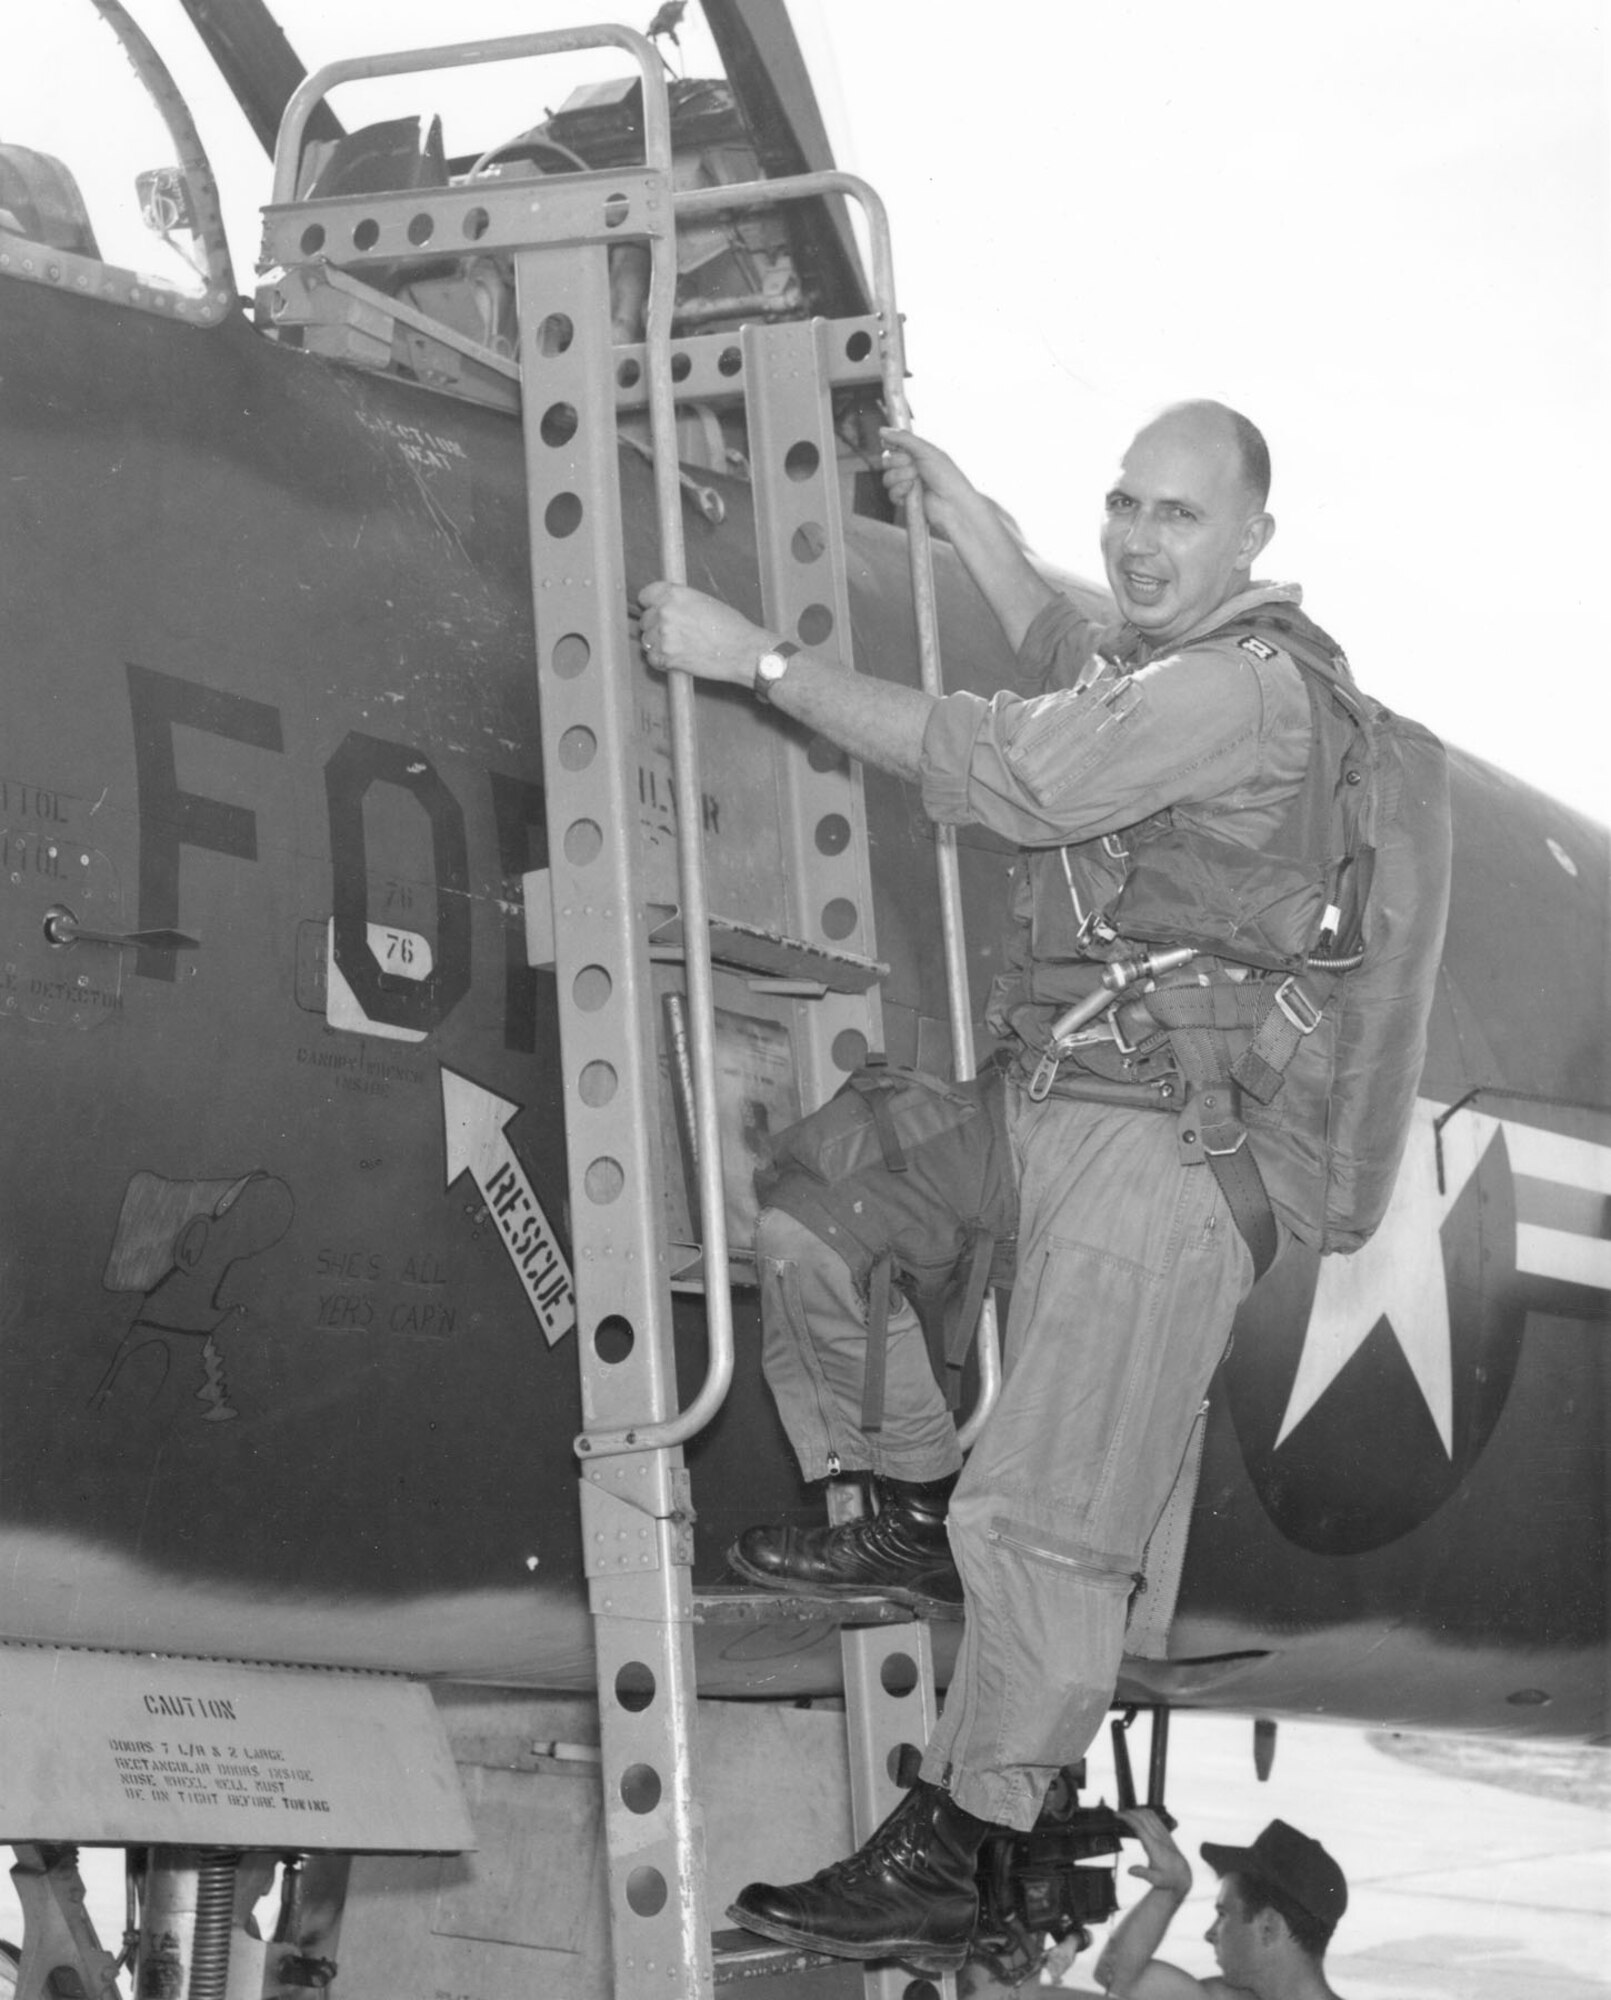 Capt. Donald Beck getting out of his RF-101C after flying his 100th “counter” on Nov. 15, 1965. (U.S. Air Force photo)